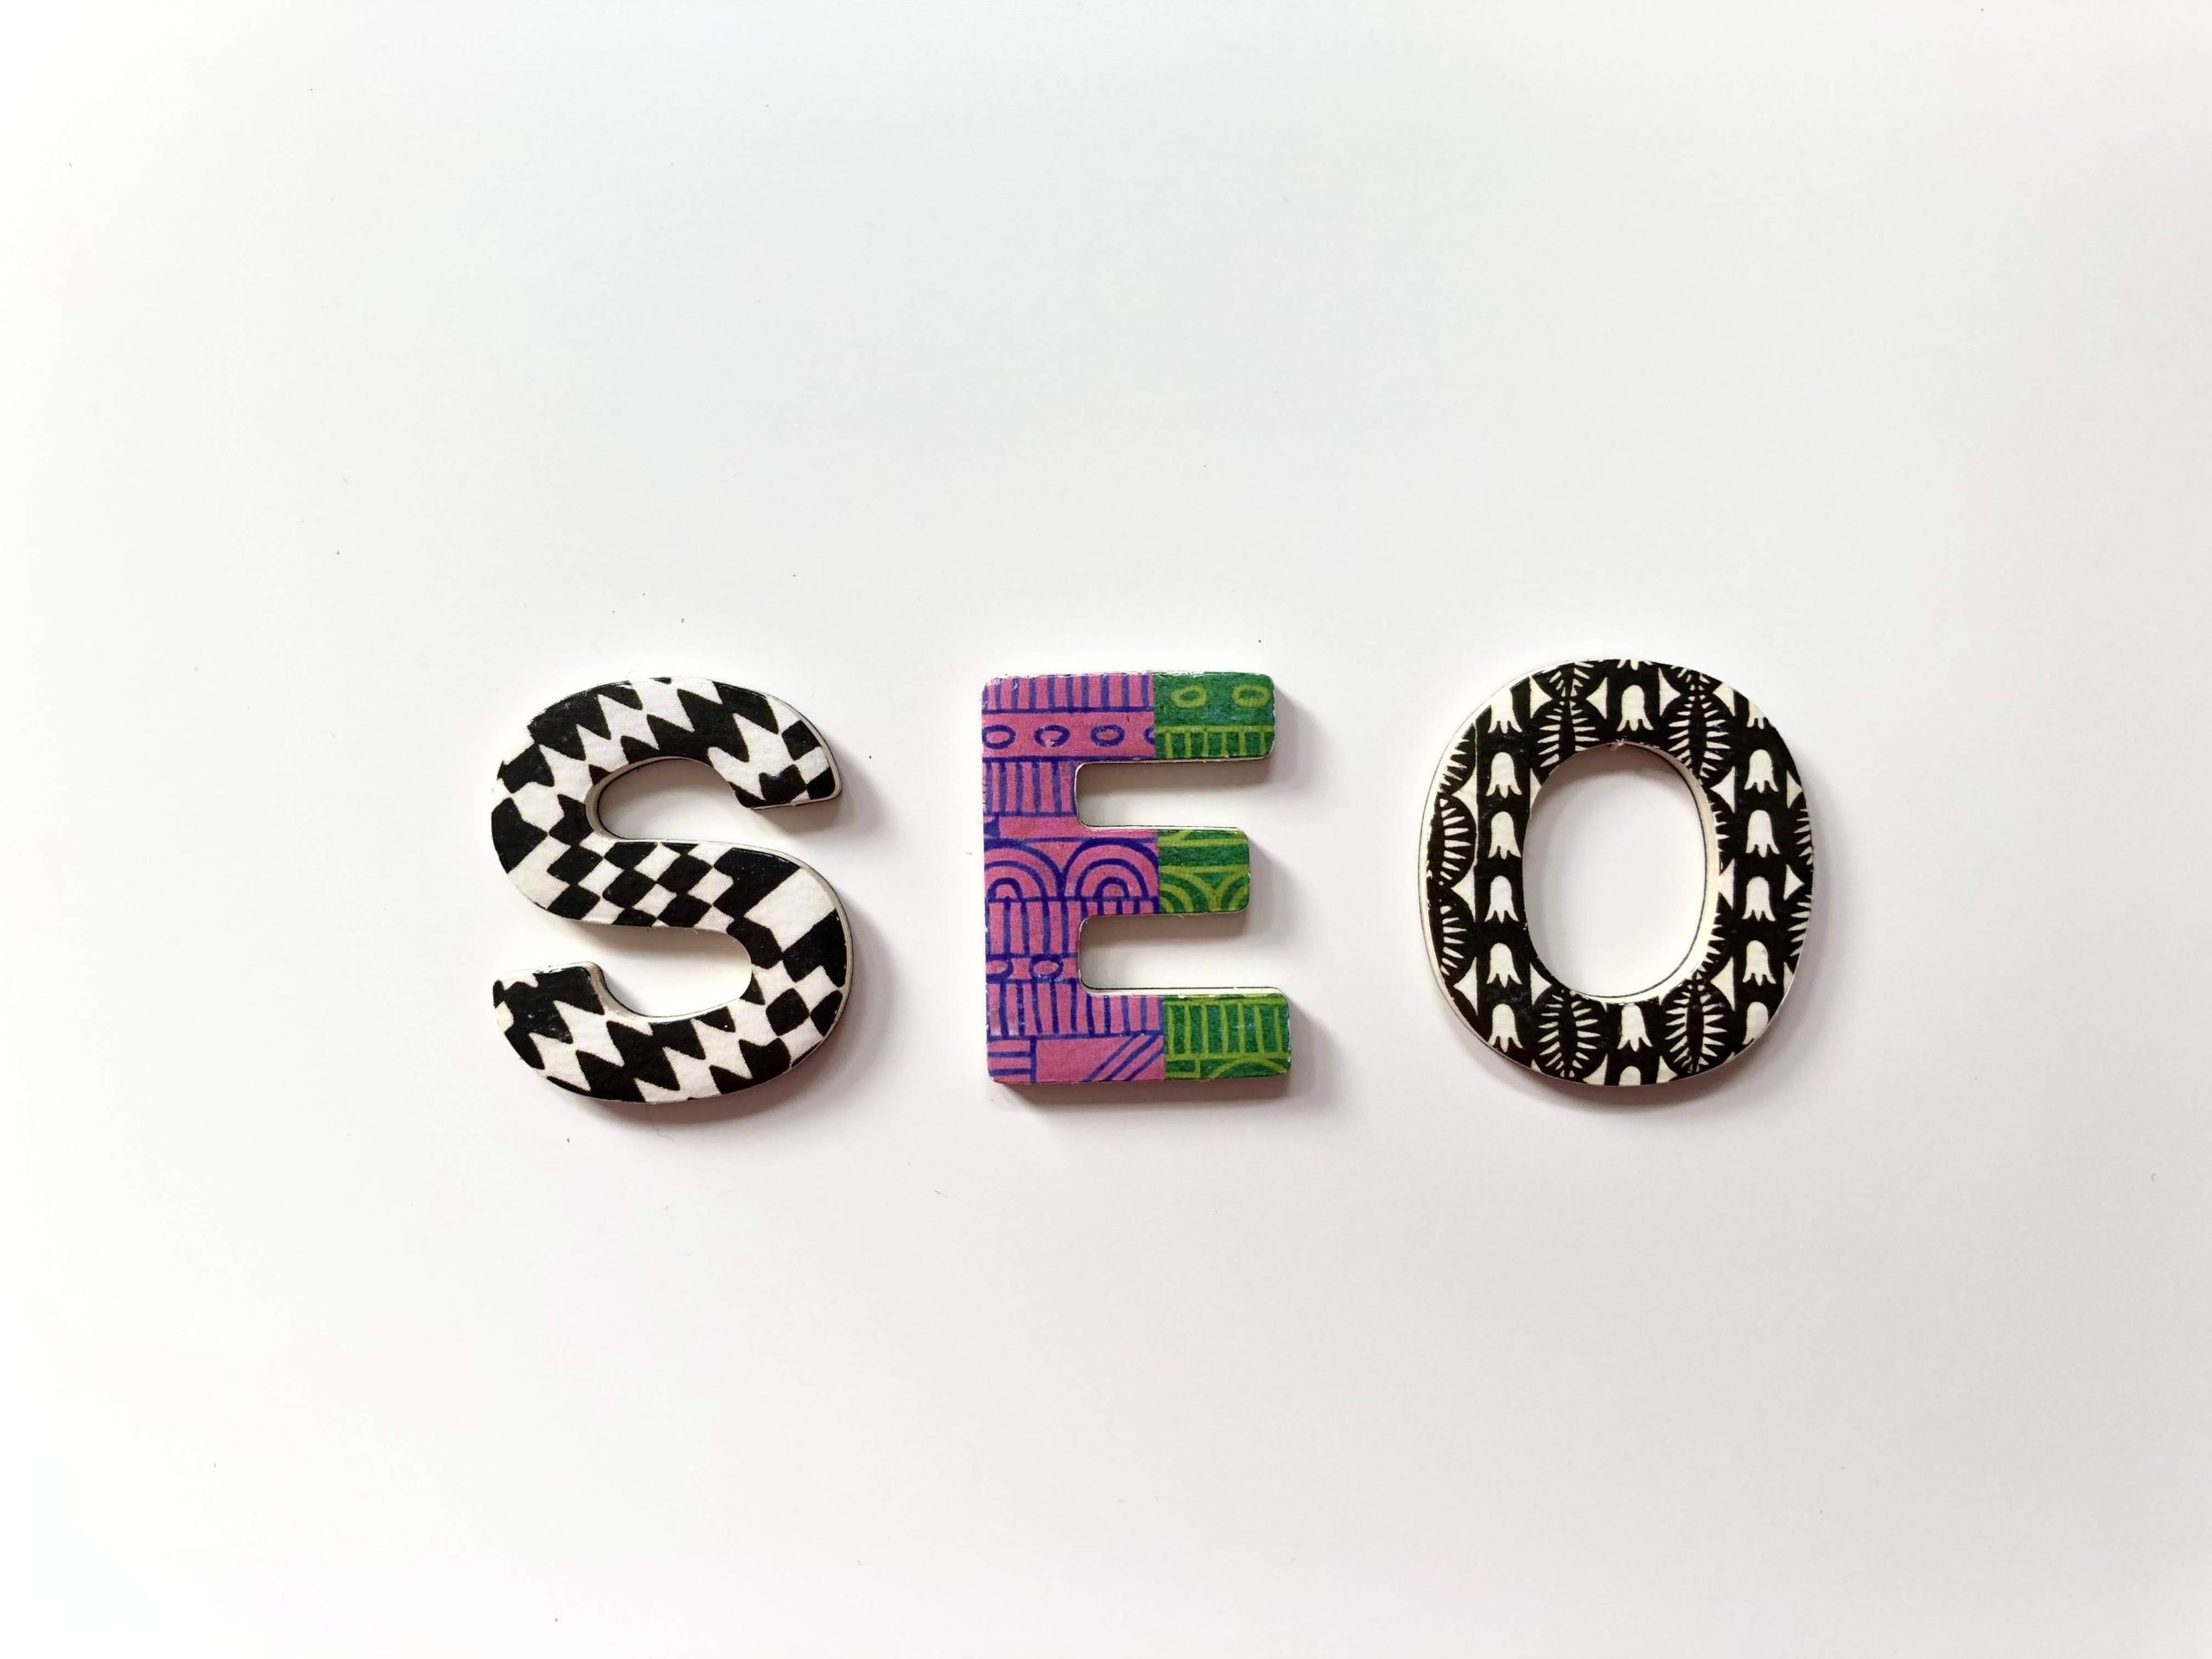 5 steps to boost your websites SEO